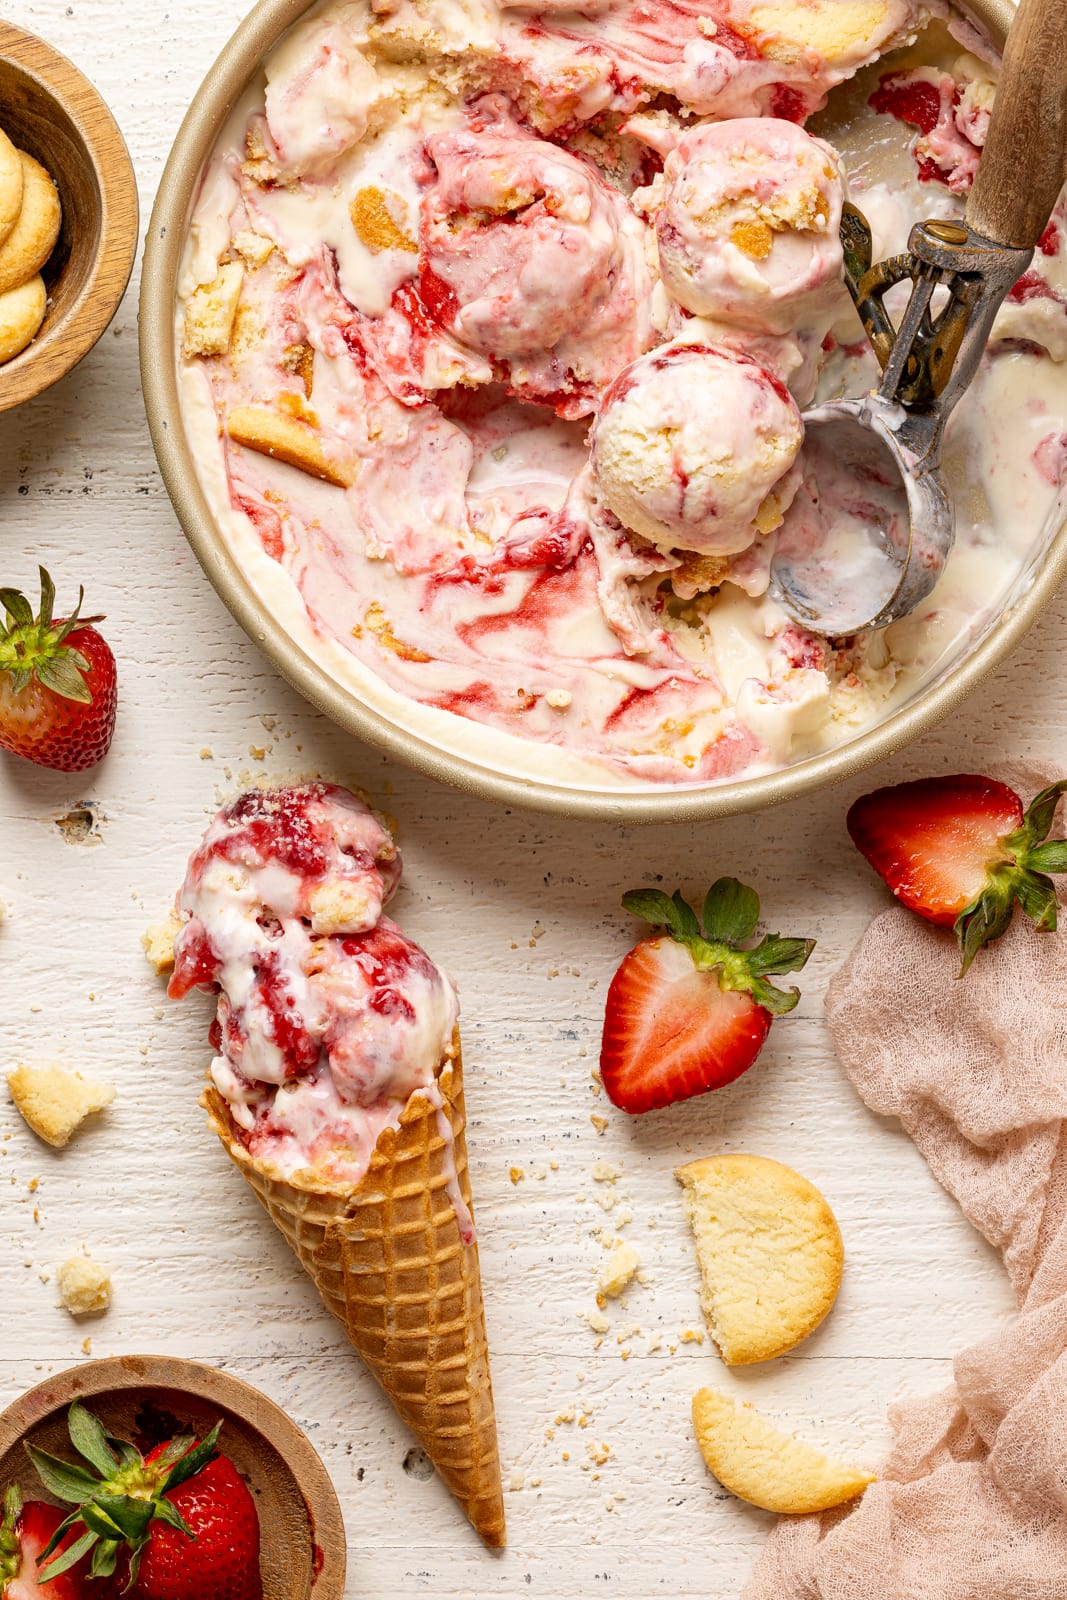 Ice cream cone with ice cream in a container with strawberries and cookies.